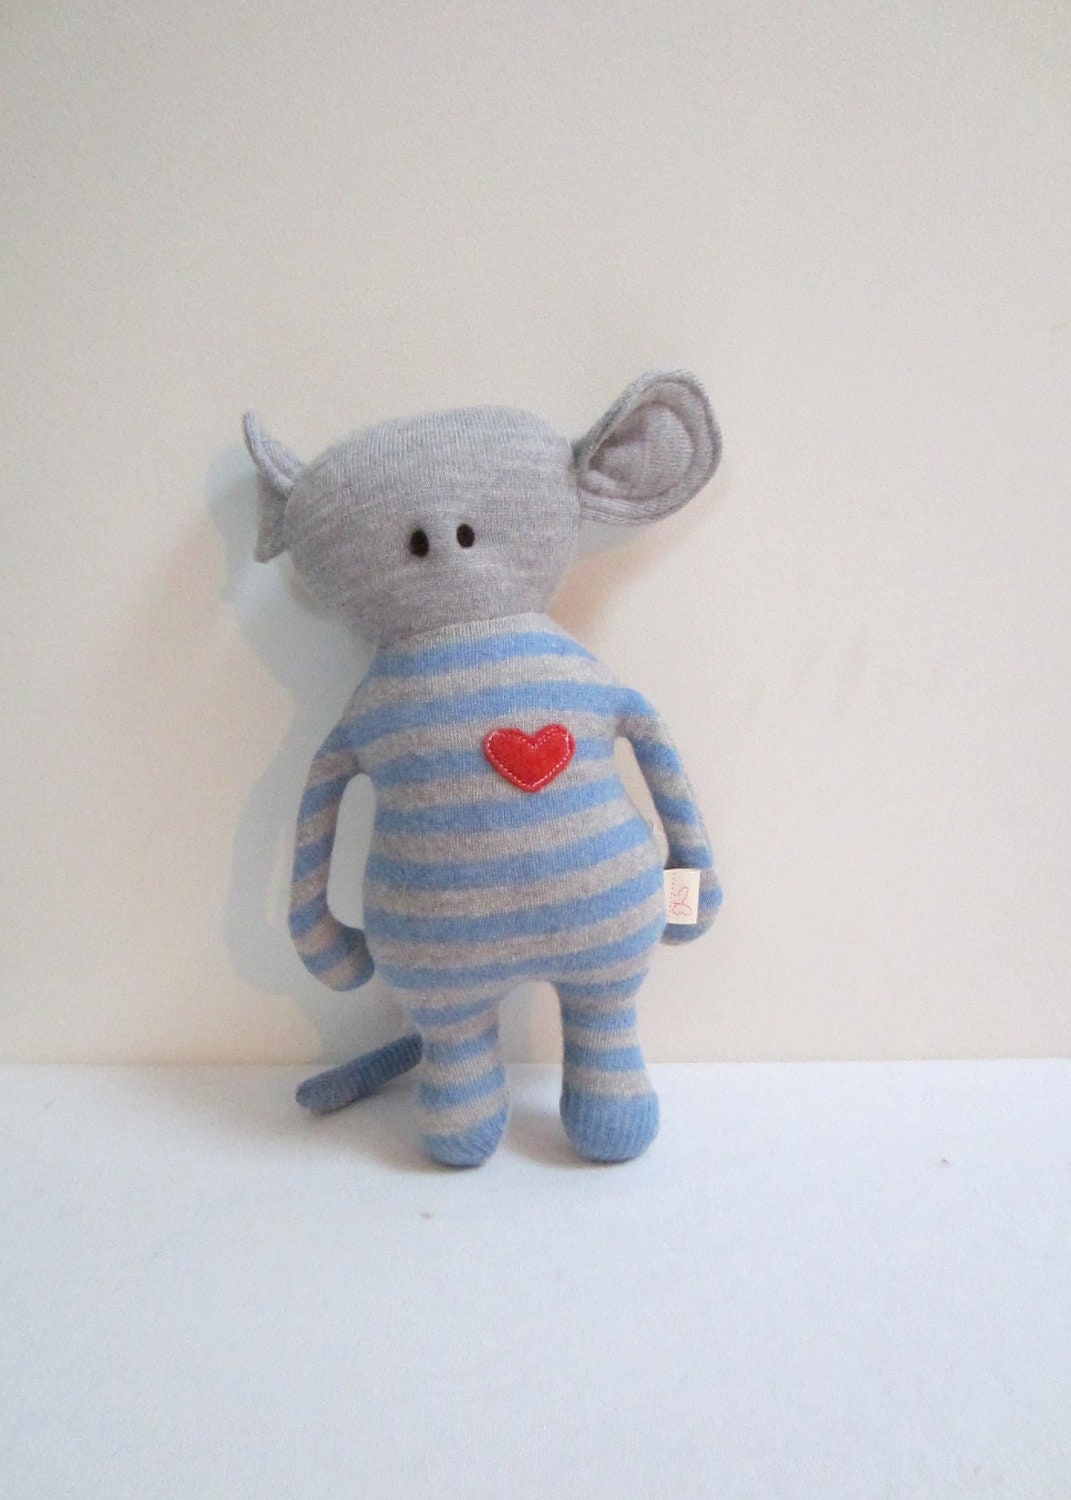 Mousy Critter Monster OOAK doll eco friendly upcycled wool sweater Grey blue stripes soft stocking stuffer collectors item - bubyNoa